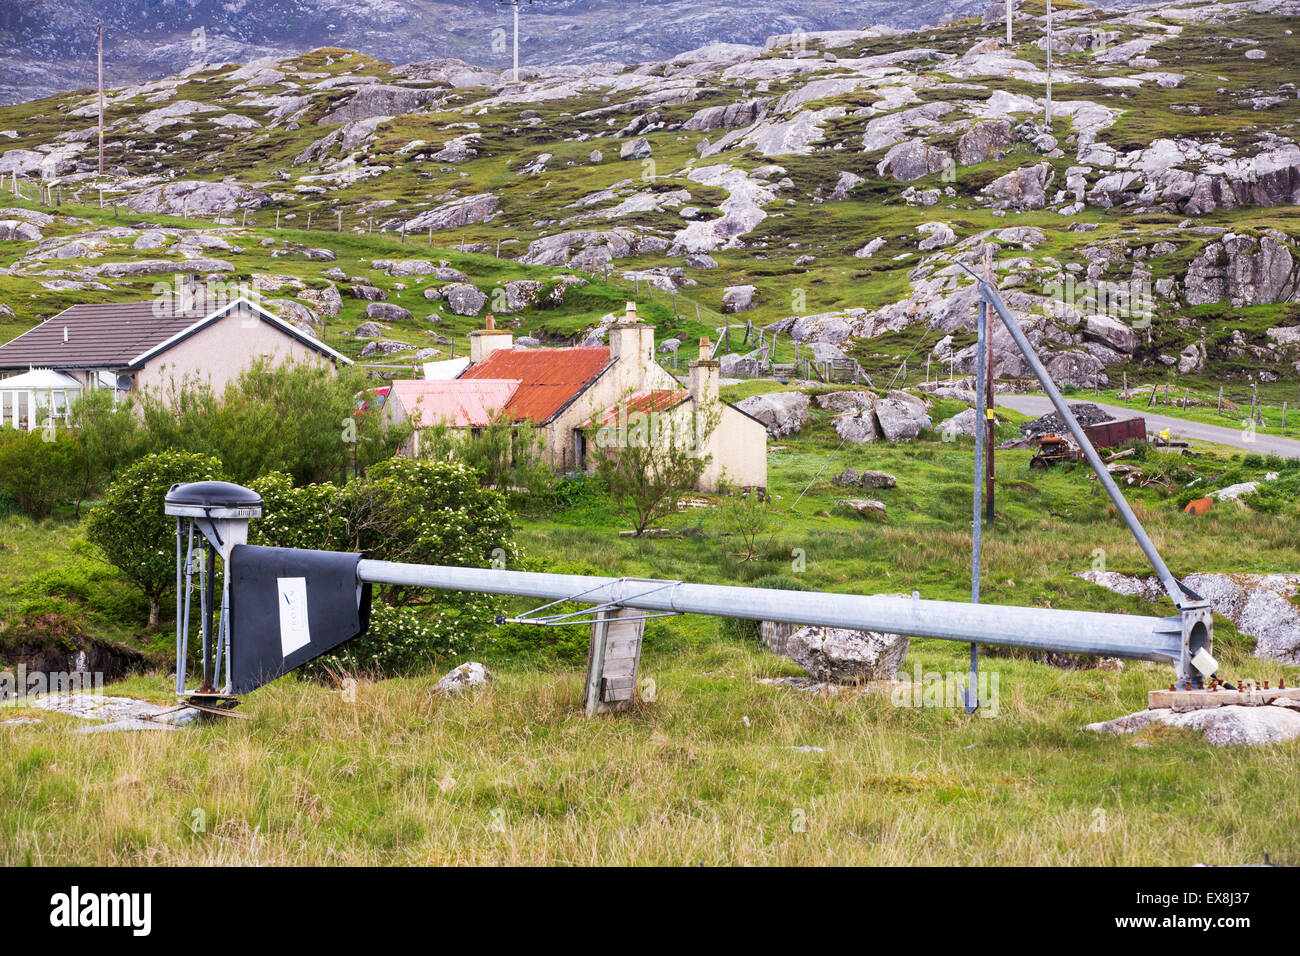 Barren, rugged scenery on the Golden Road on the East side of the Isle of Harris, Outer Hebrides, Scotland, UK, with a broken down wind turbine. Stock Photo